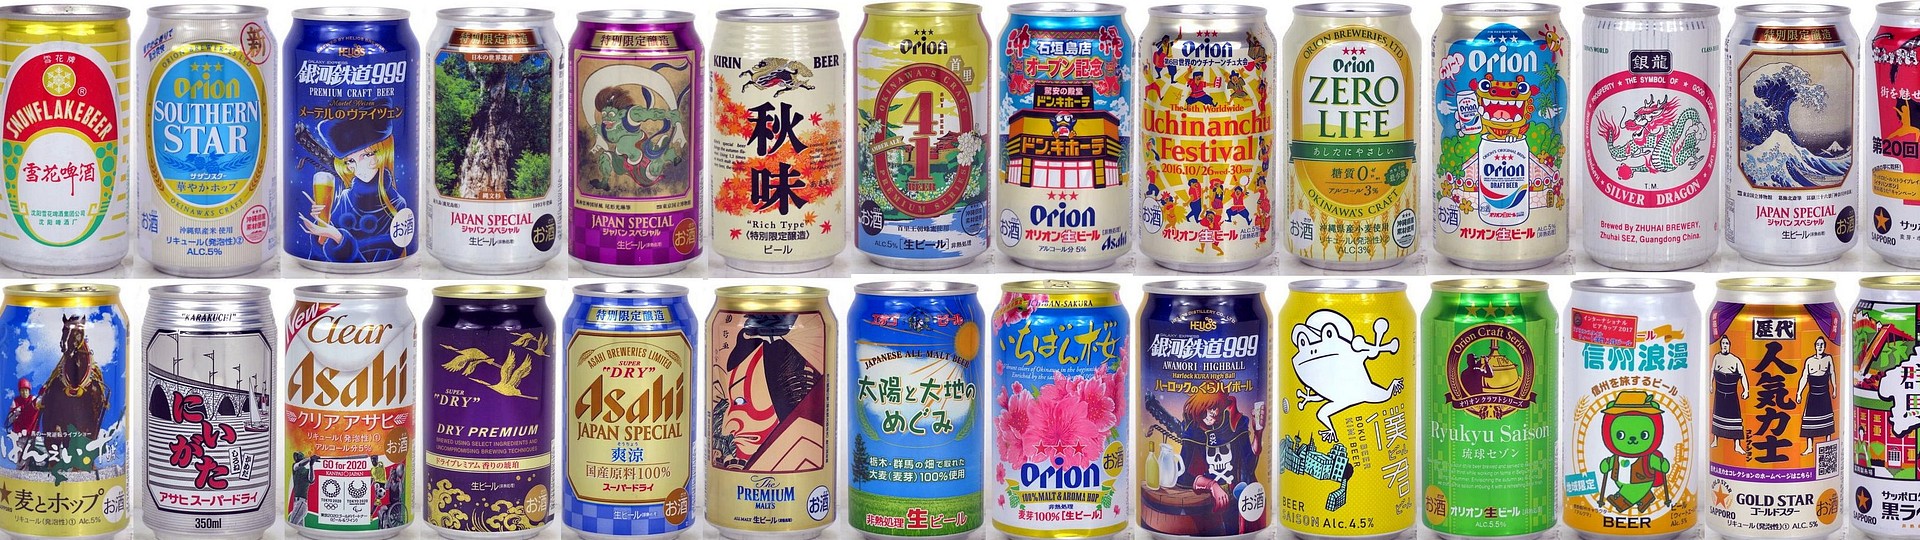 TavernTrove's Japanese, Chinese and Korean Beer Can Auction by TavernTrove